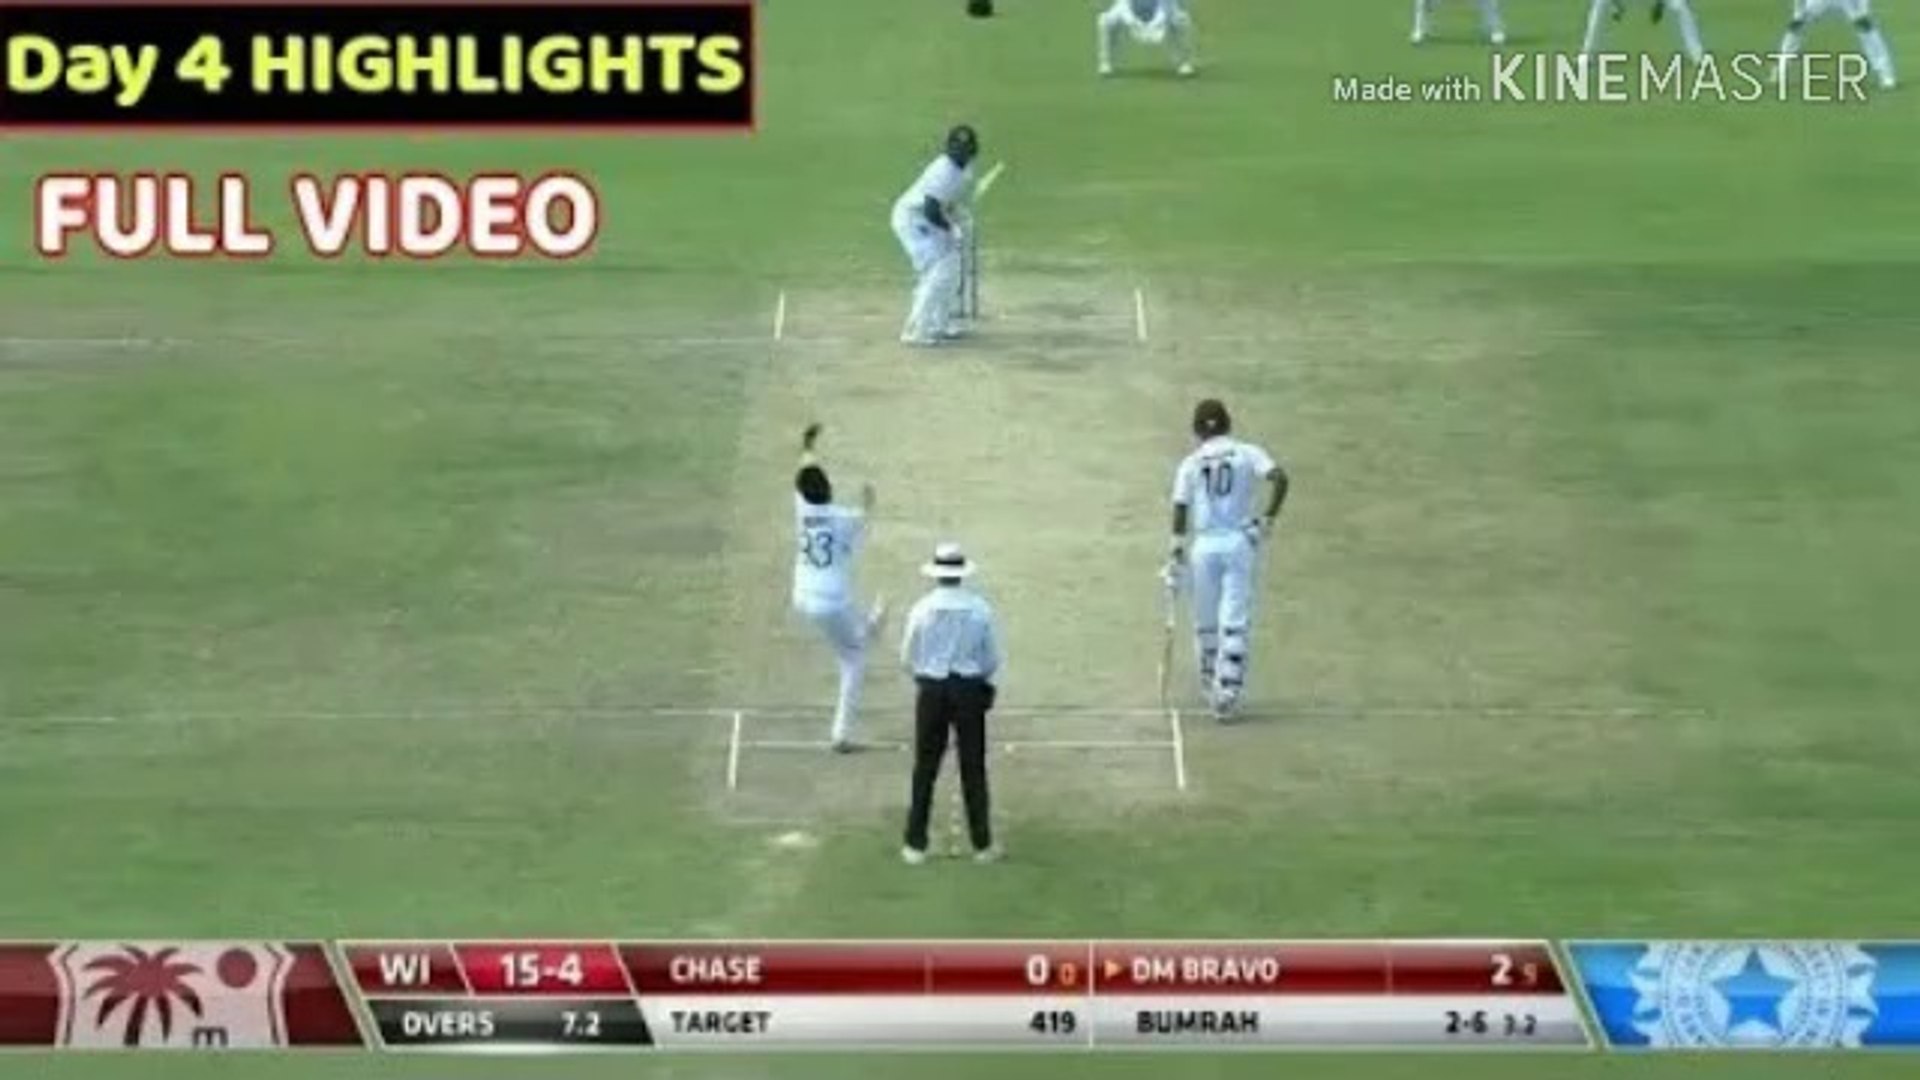 India Vs West Indies 2nd Test 4th Day Full Match Highlights - video  dailymotion